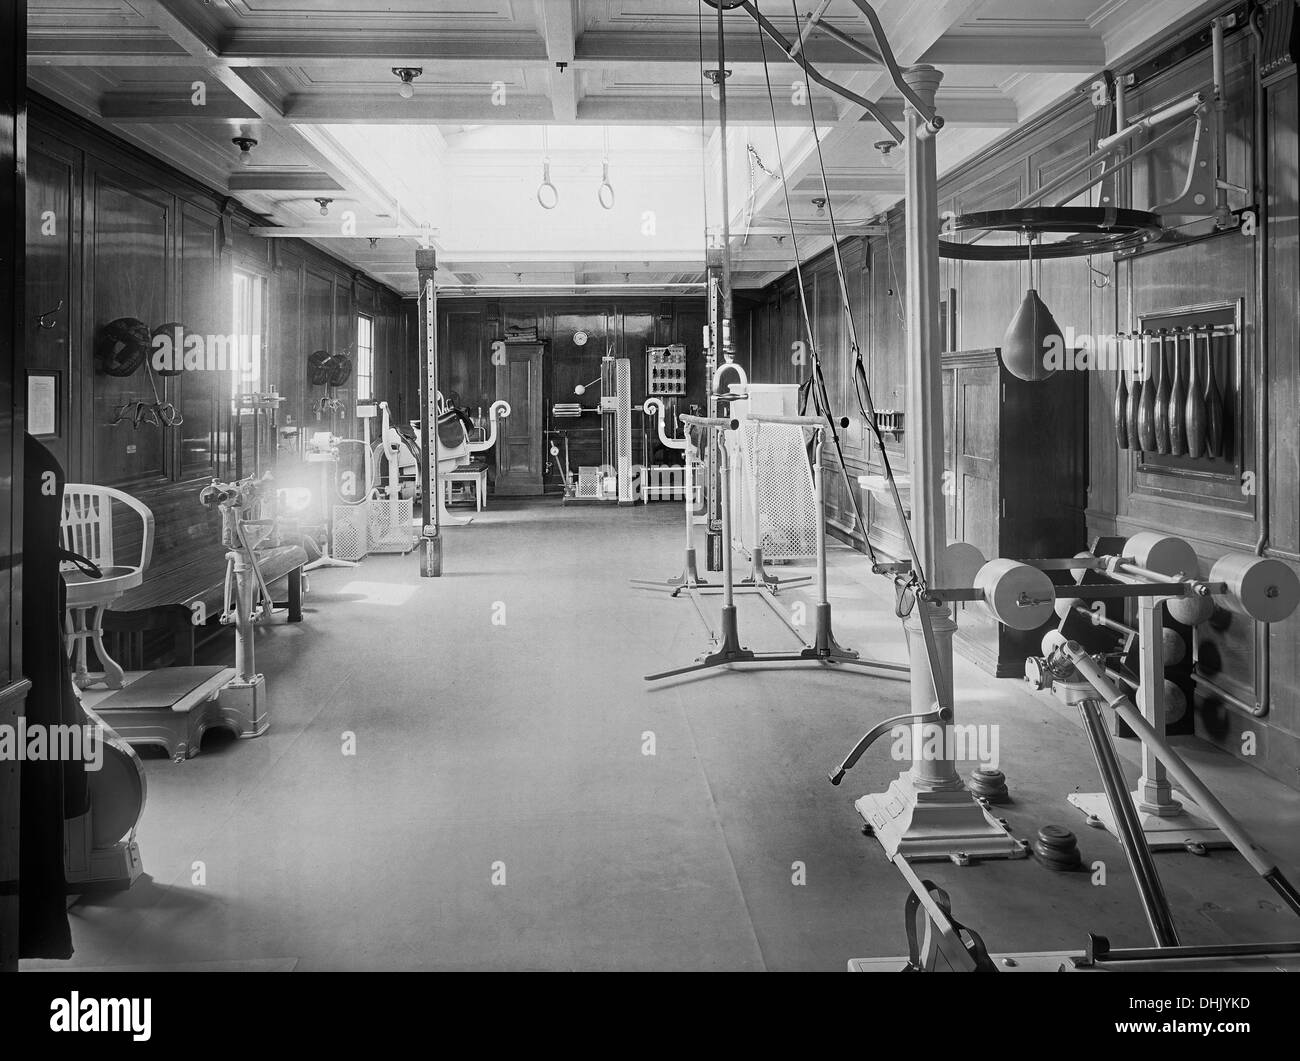 View of the gym of the ocean liner 'Imperator' of Hapag Hamburg, AG Vulcan Stetting, shipyard 1912, photograph taken in 1913/1914. The image was taken by the German photographer Oswald Lübeck, one of the earliest representatives of travel photography and ship photography aboard passenger ships. Photo: Deutsche Fotothek/Oswald Lübeck Stock Photo